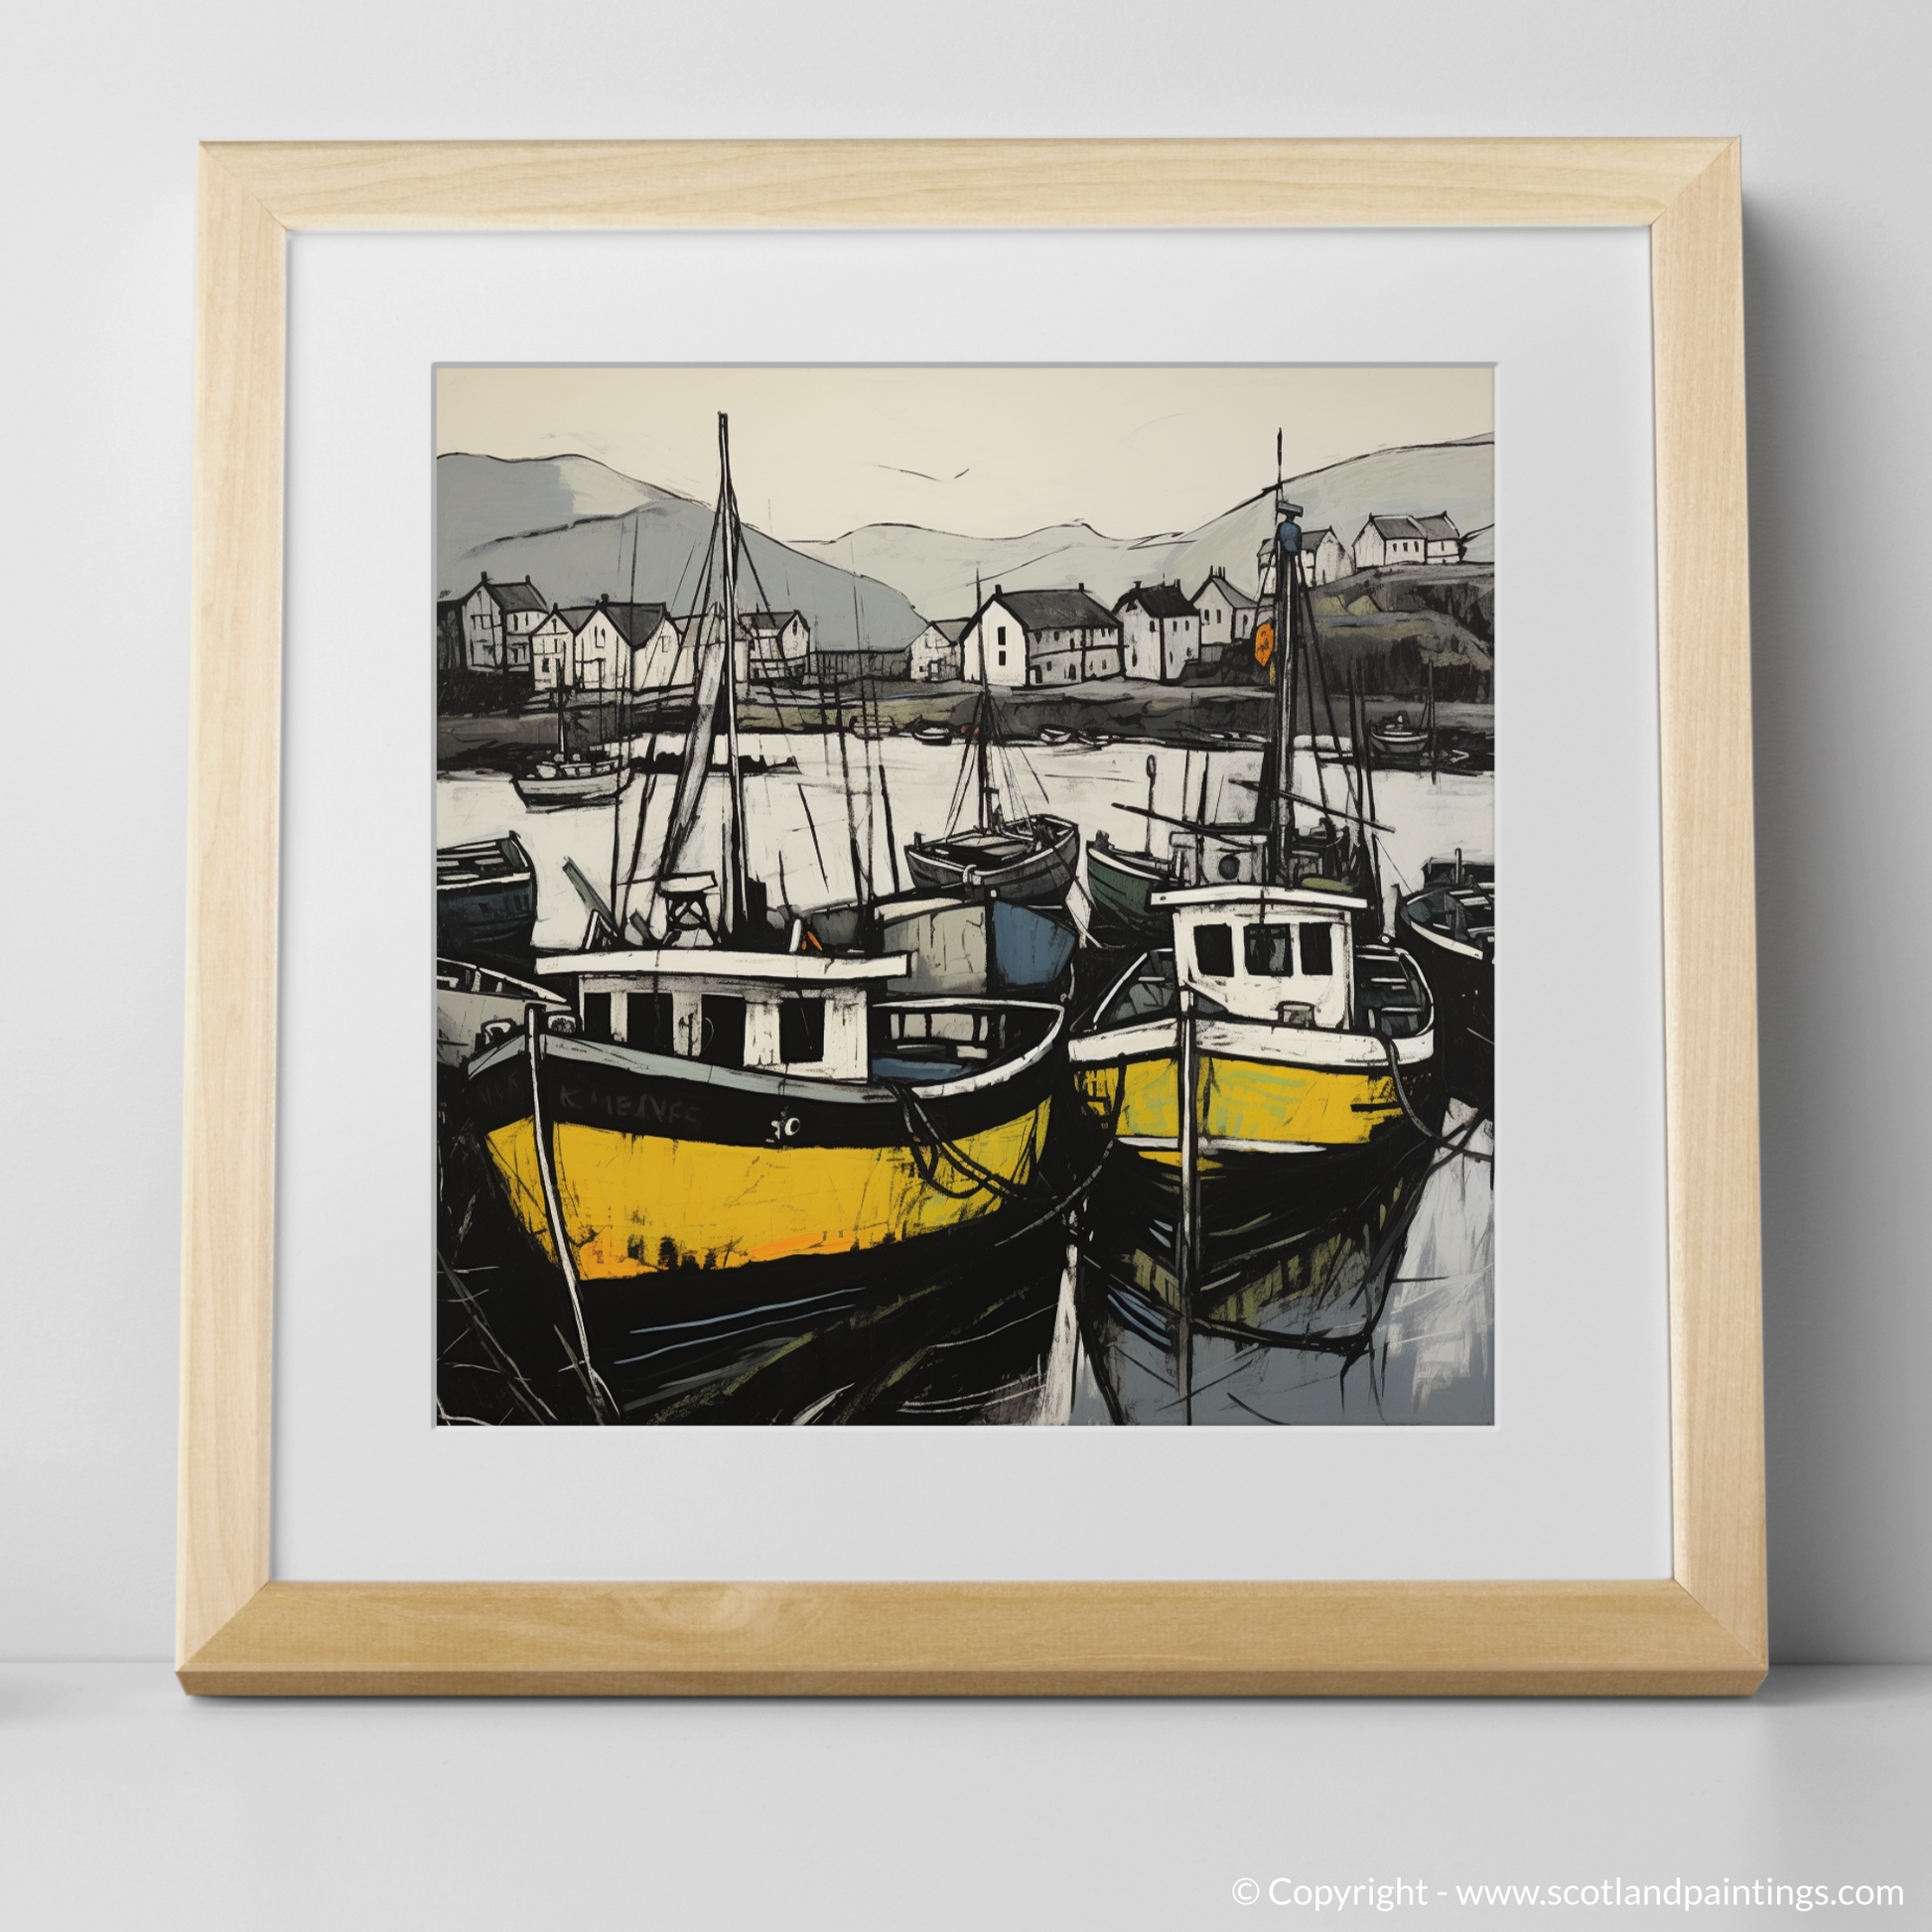 Art Print of Castlebay Harbour, Isle of Barra with a natural frame